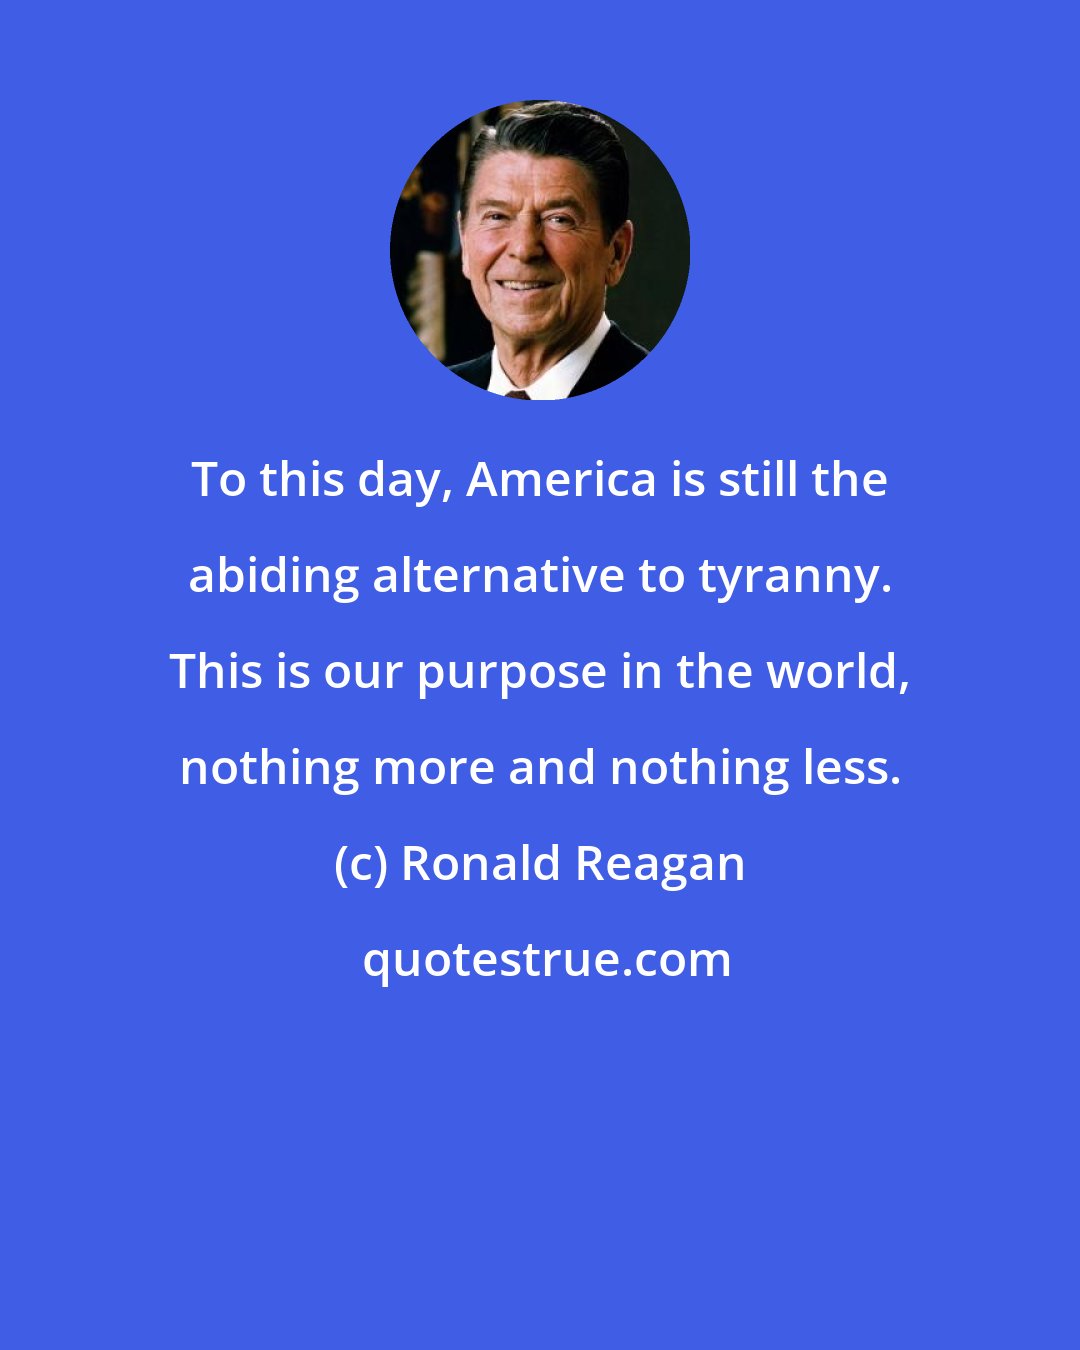 Ronald Reagan: To this day, America is still the abiding alternative to tyranny. This is our purpose in the world, nothing more and nothing less.